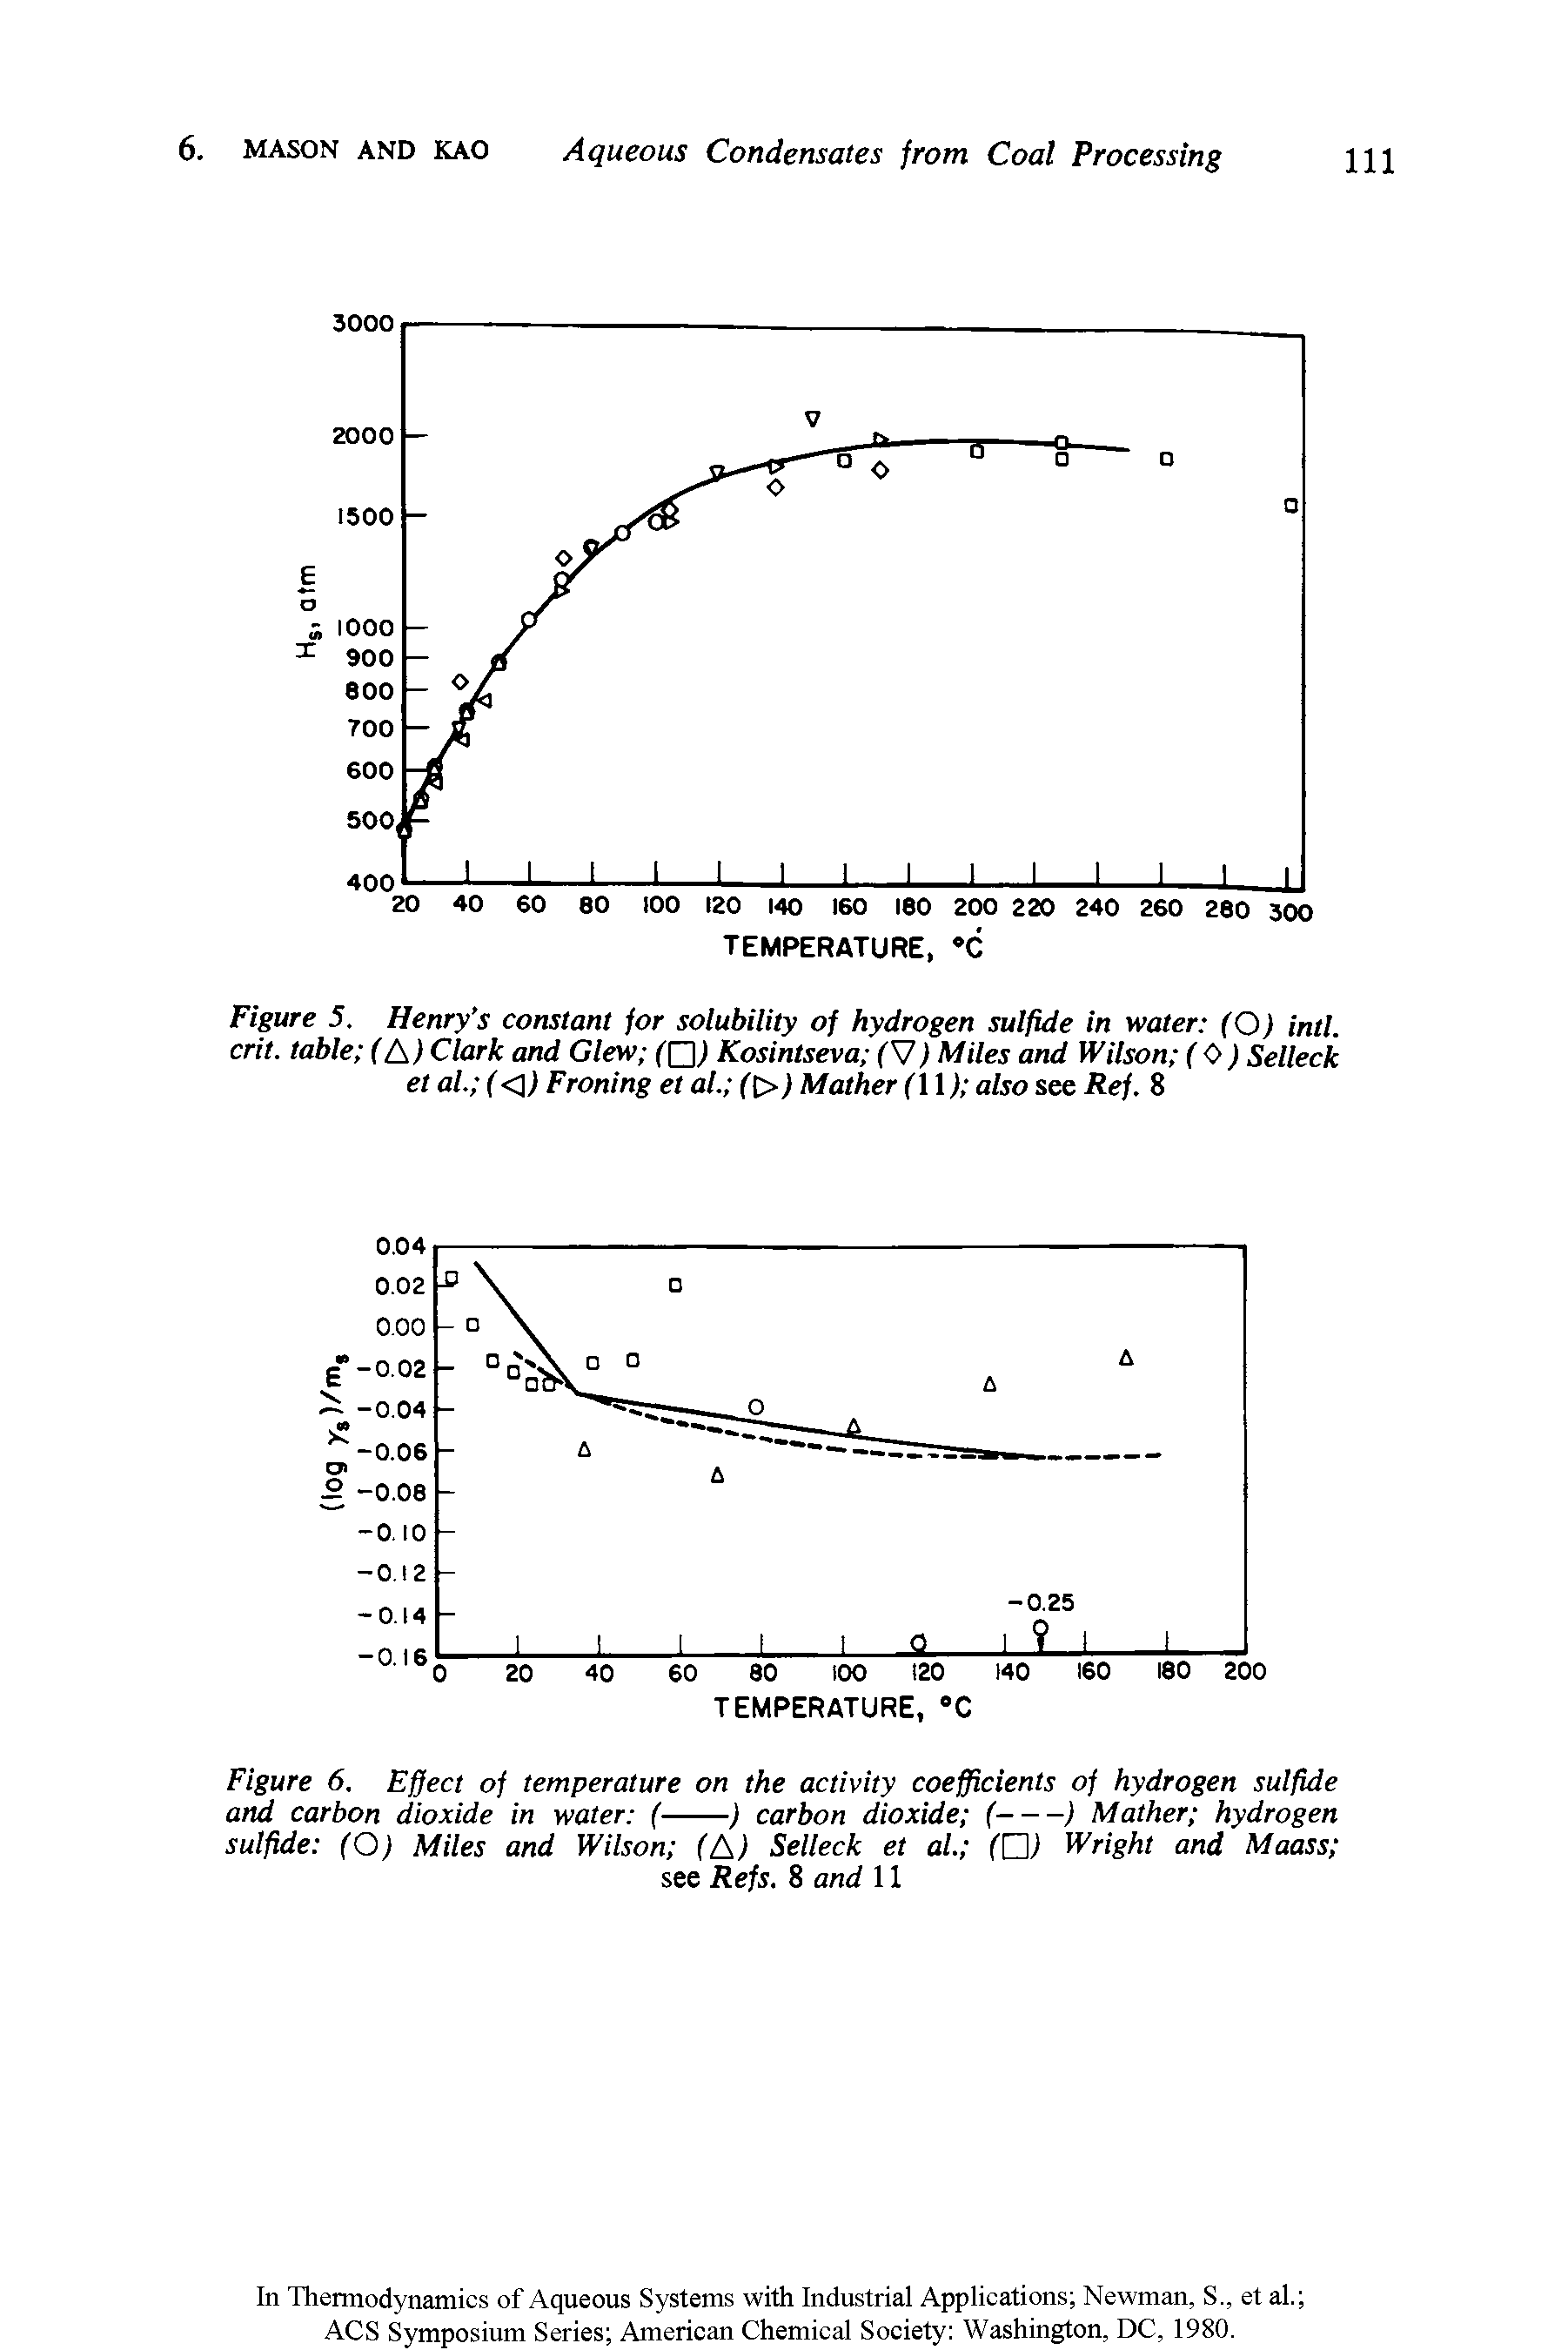 Figure 5. Henry s constant for solubility of hydrogen sulfide in water (O) inti, crit. table (A) Clark and Glew Kosintseva (V) Miles and Wilson (0) Selleck et al. (<l) Froning et al. (t>) Mather (11) also see Ref. 8...